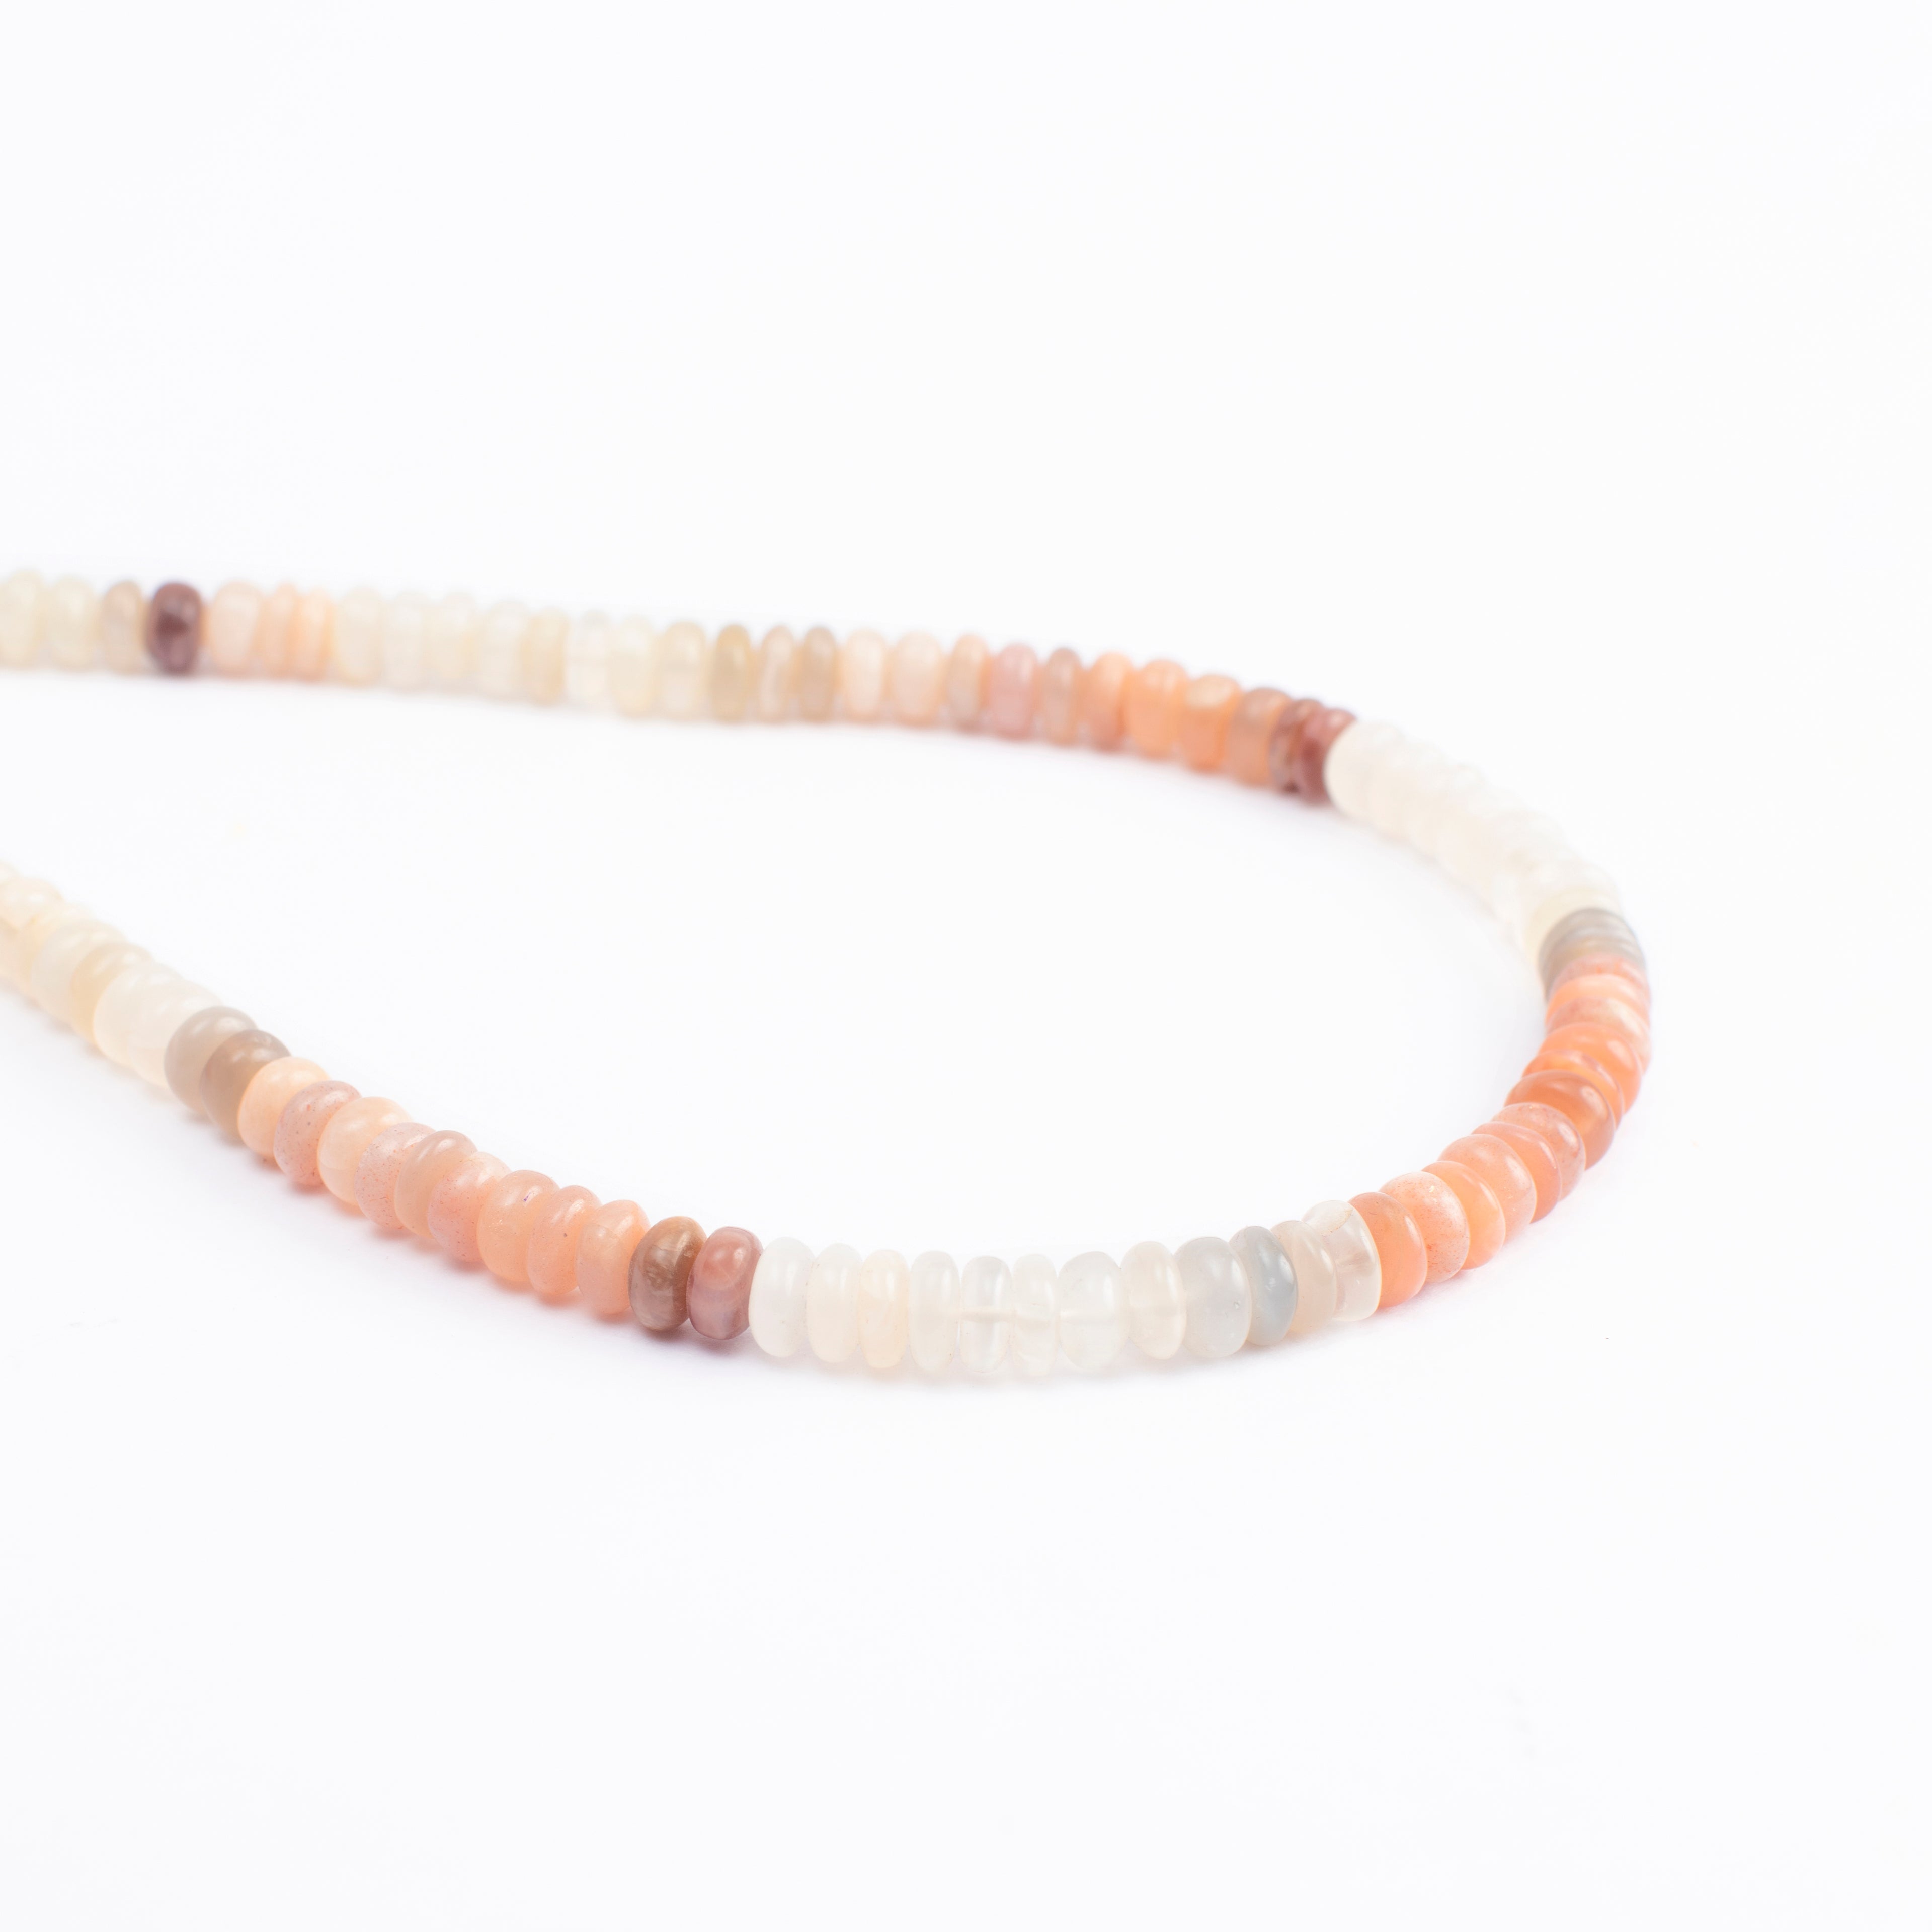 Moonstone Multicolored Oval Beads Necklace